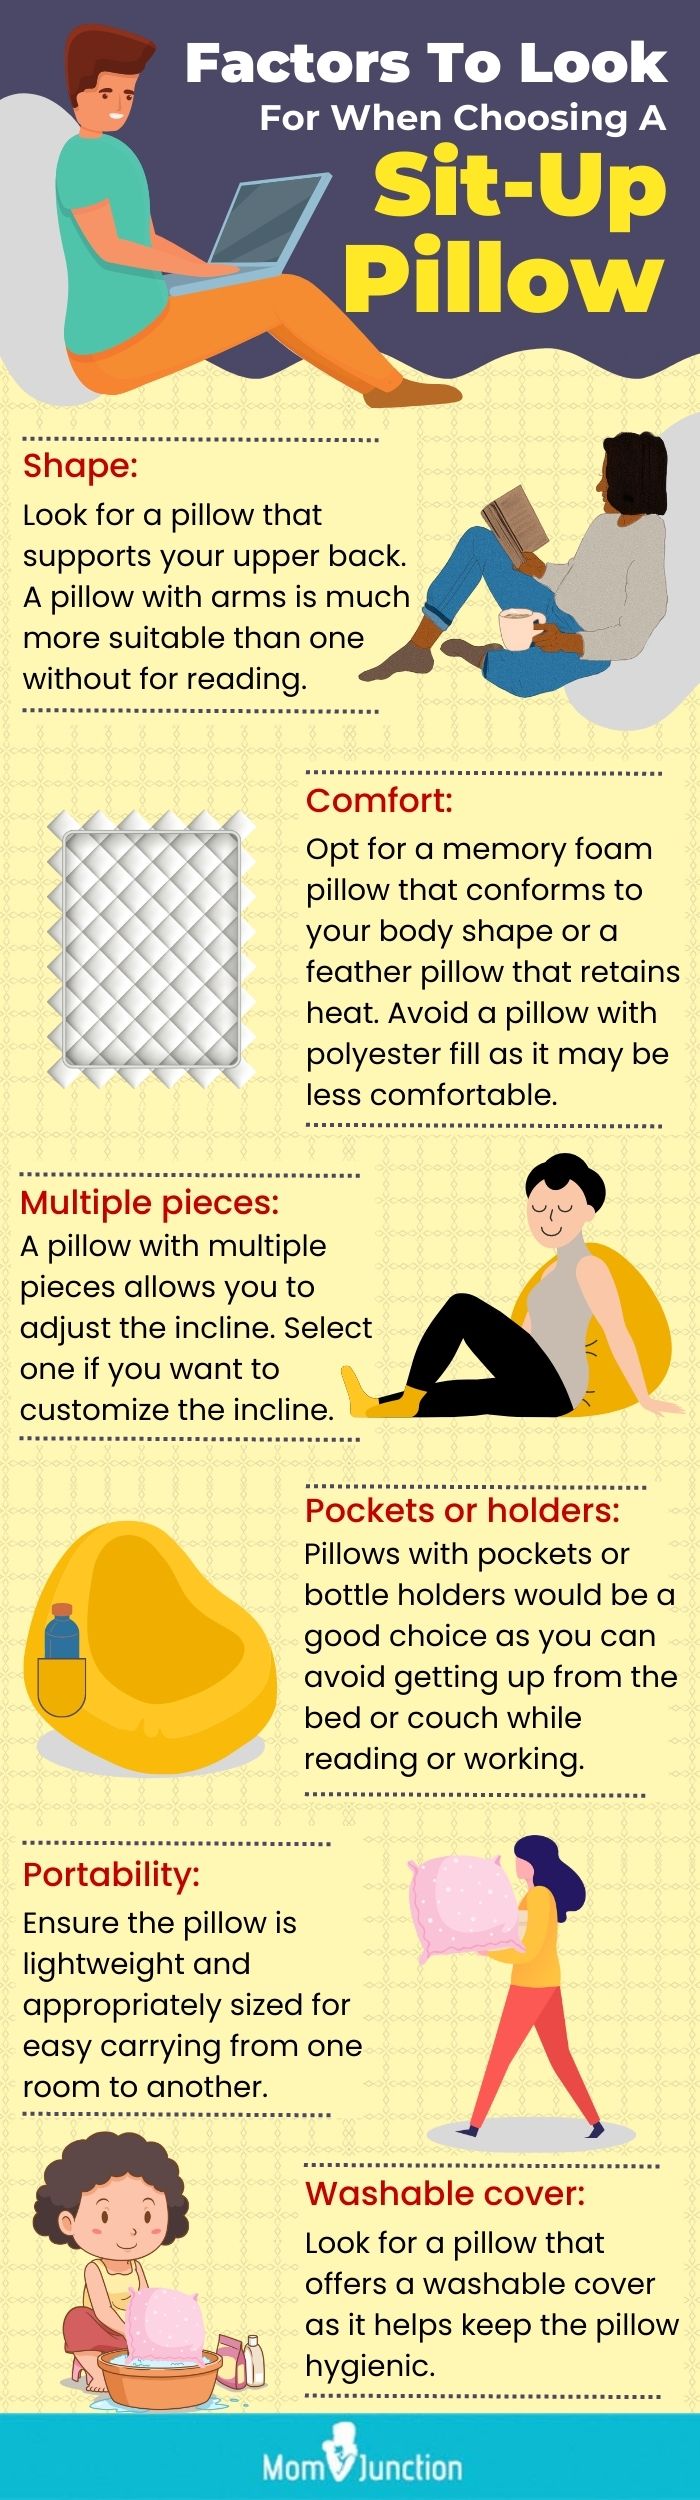 https://www.momjunction.com/wp-content/uploads/2023/01/Factors-To-Look-For-When-Choosing-A-Sit-Up-Pillow.jpg